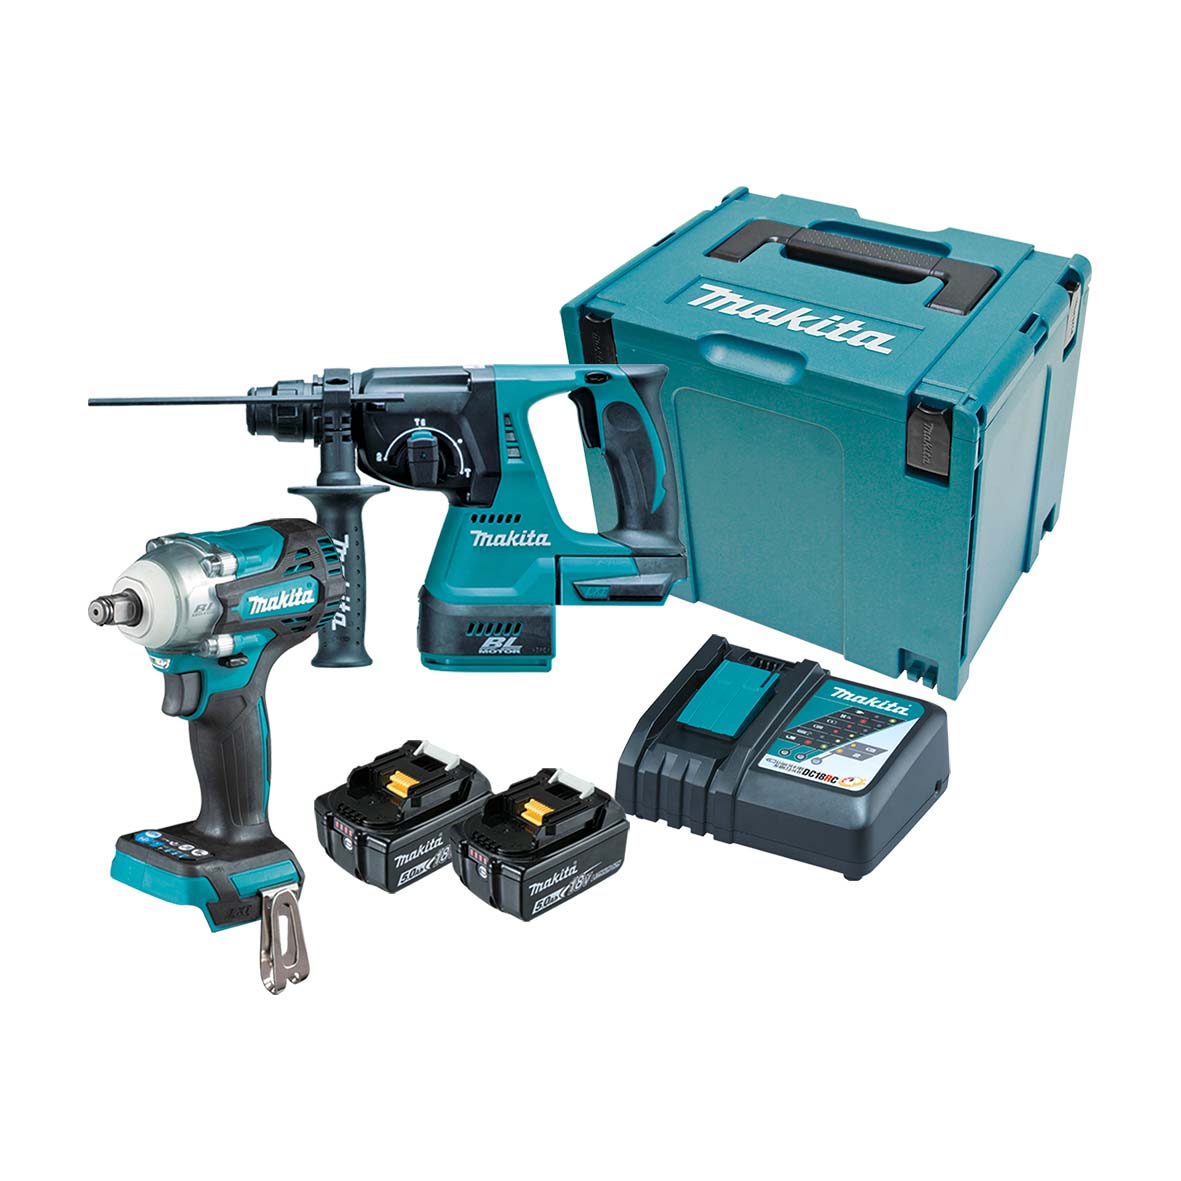 18V 5.0AH 2Pce Brushless Rotary Hammer Drill + Impact Wrench Kit DLX2372TJ by Makita